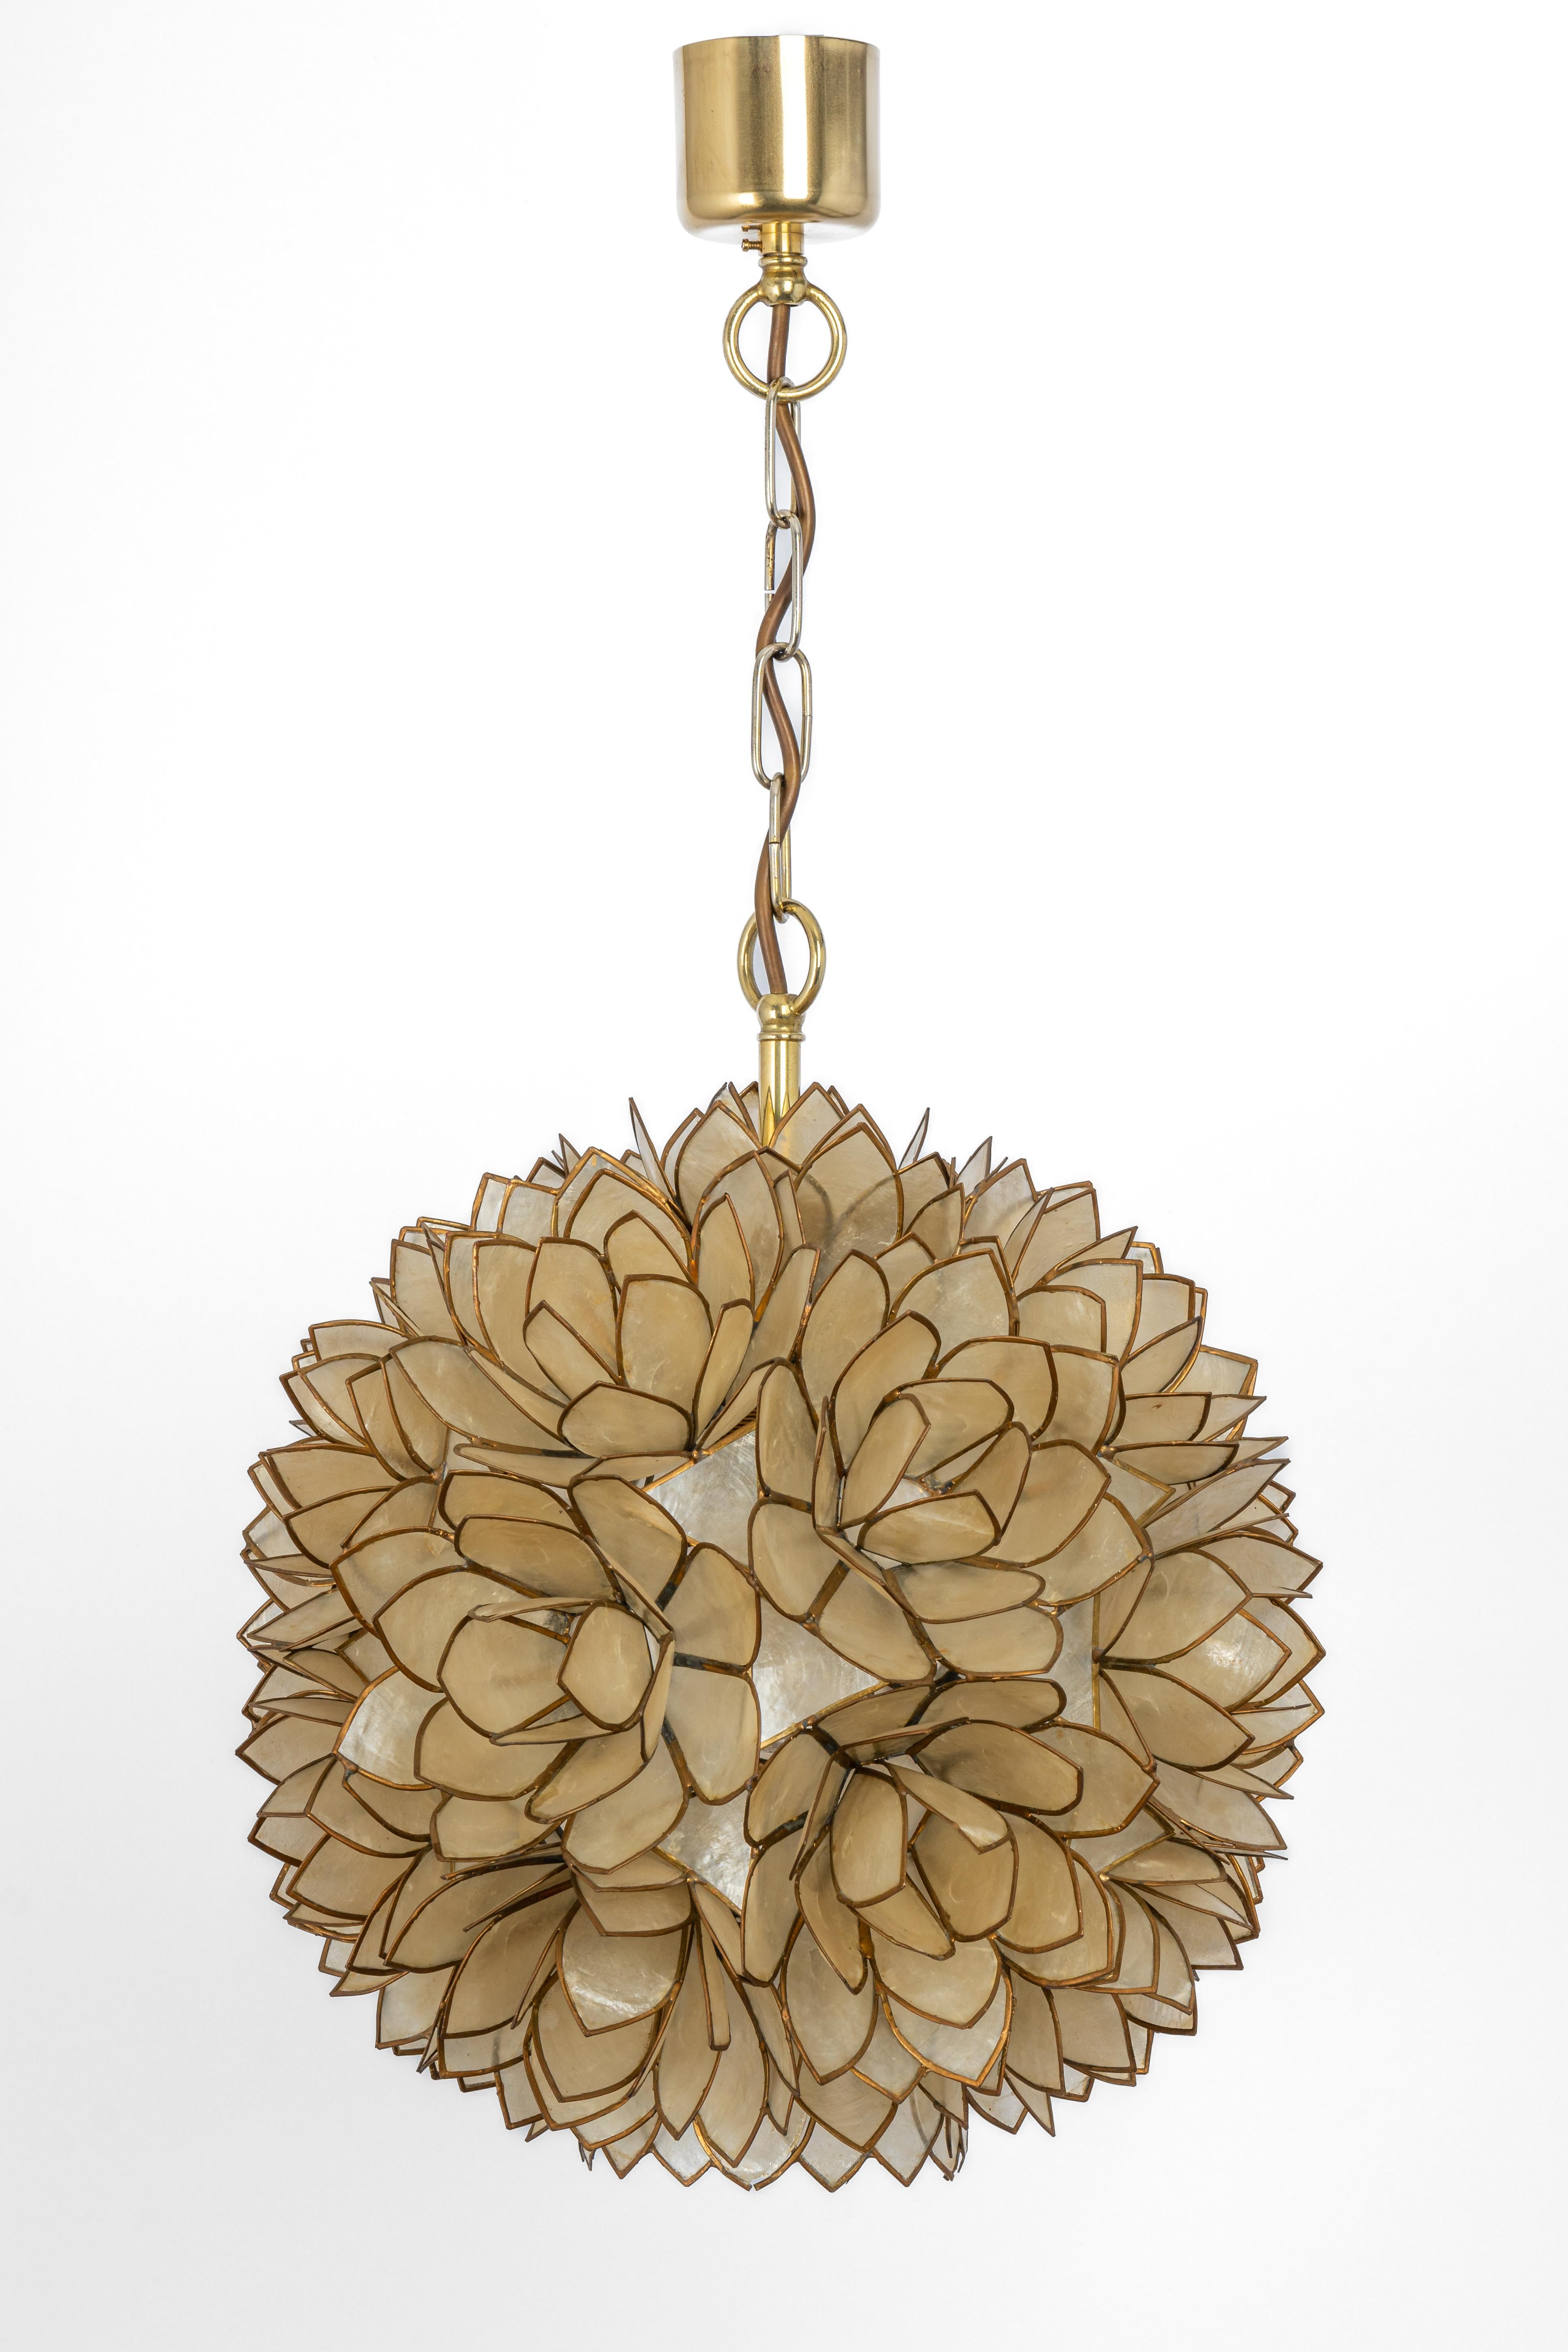 Stunning Capiz shell Lotus ball chandelier pendant light Germany, 1960s

It requires 1 x E27 standard bulbs with 100W max each.
A light bulb is not included. It is possible to install this fixture in all countries (US, UK, Europe, Asia,